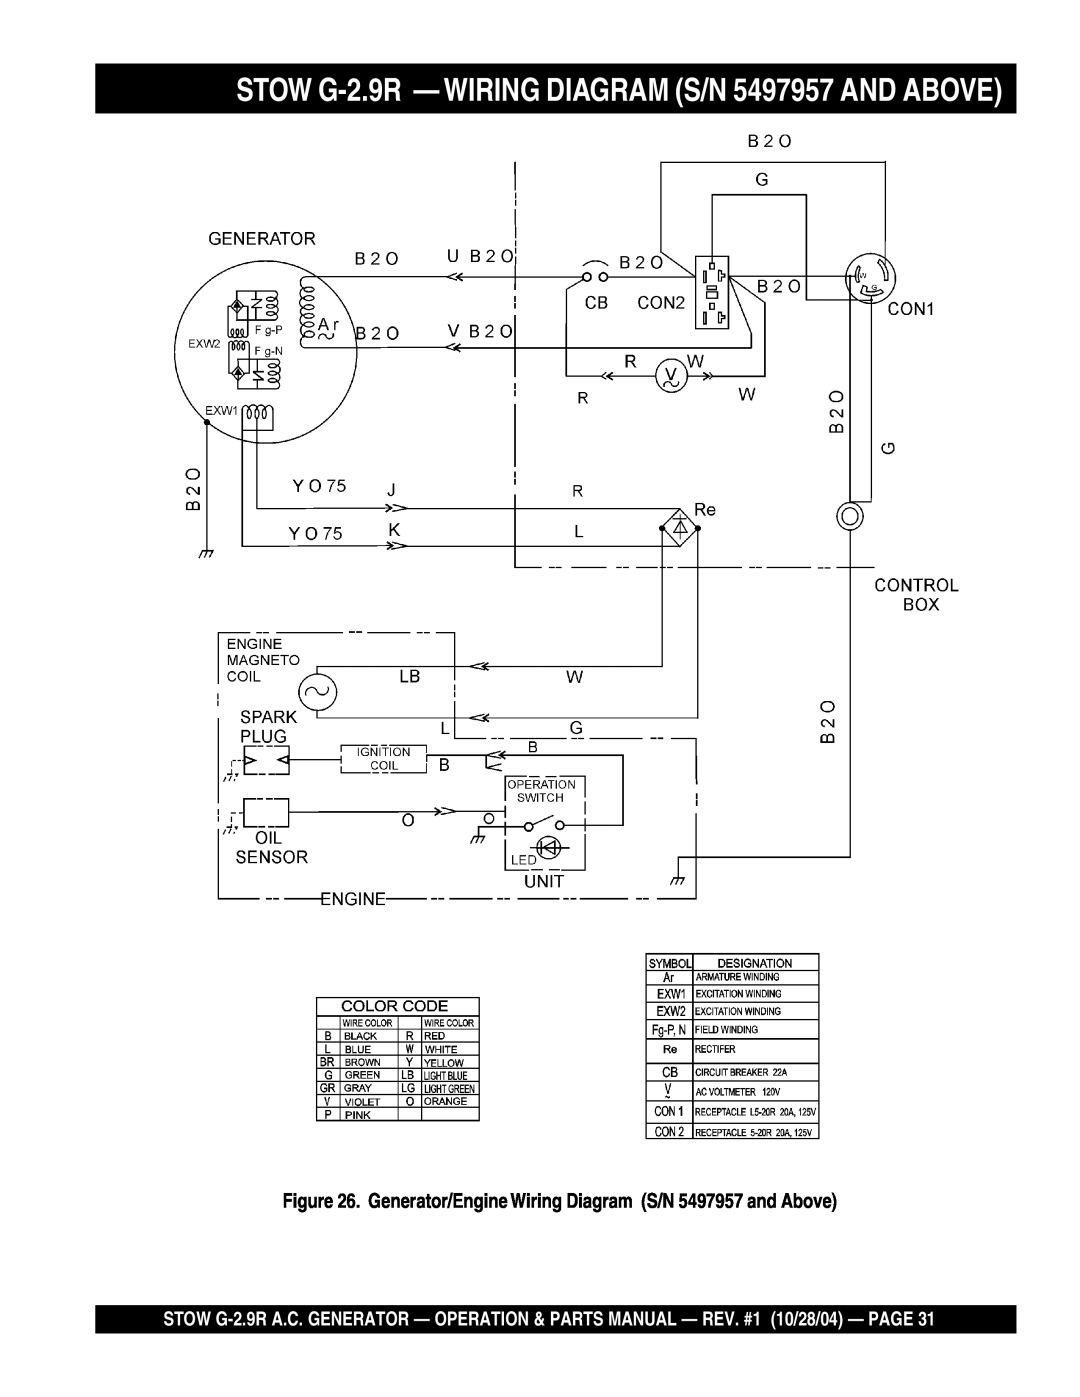 Stow manual STOW G-2.9R - WIRING DIAGRAM S/N 5497957 AND ABOVE, Generator/Engine Wiring Diagram S/N 5497957 and Above 